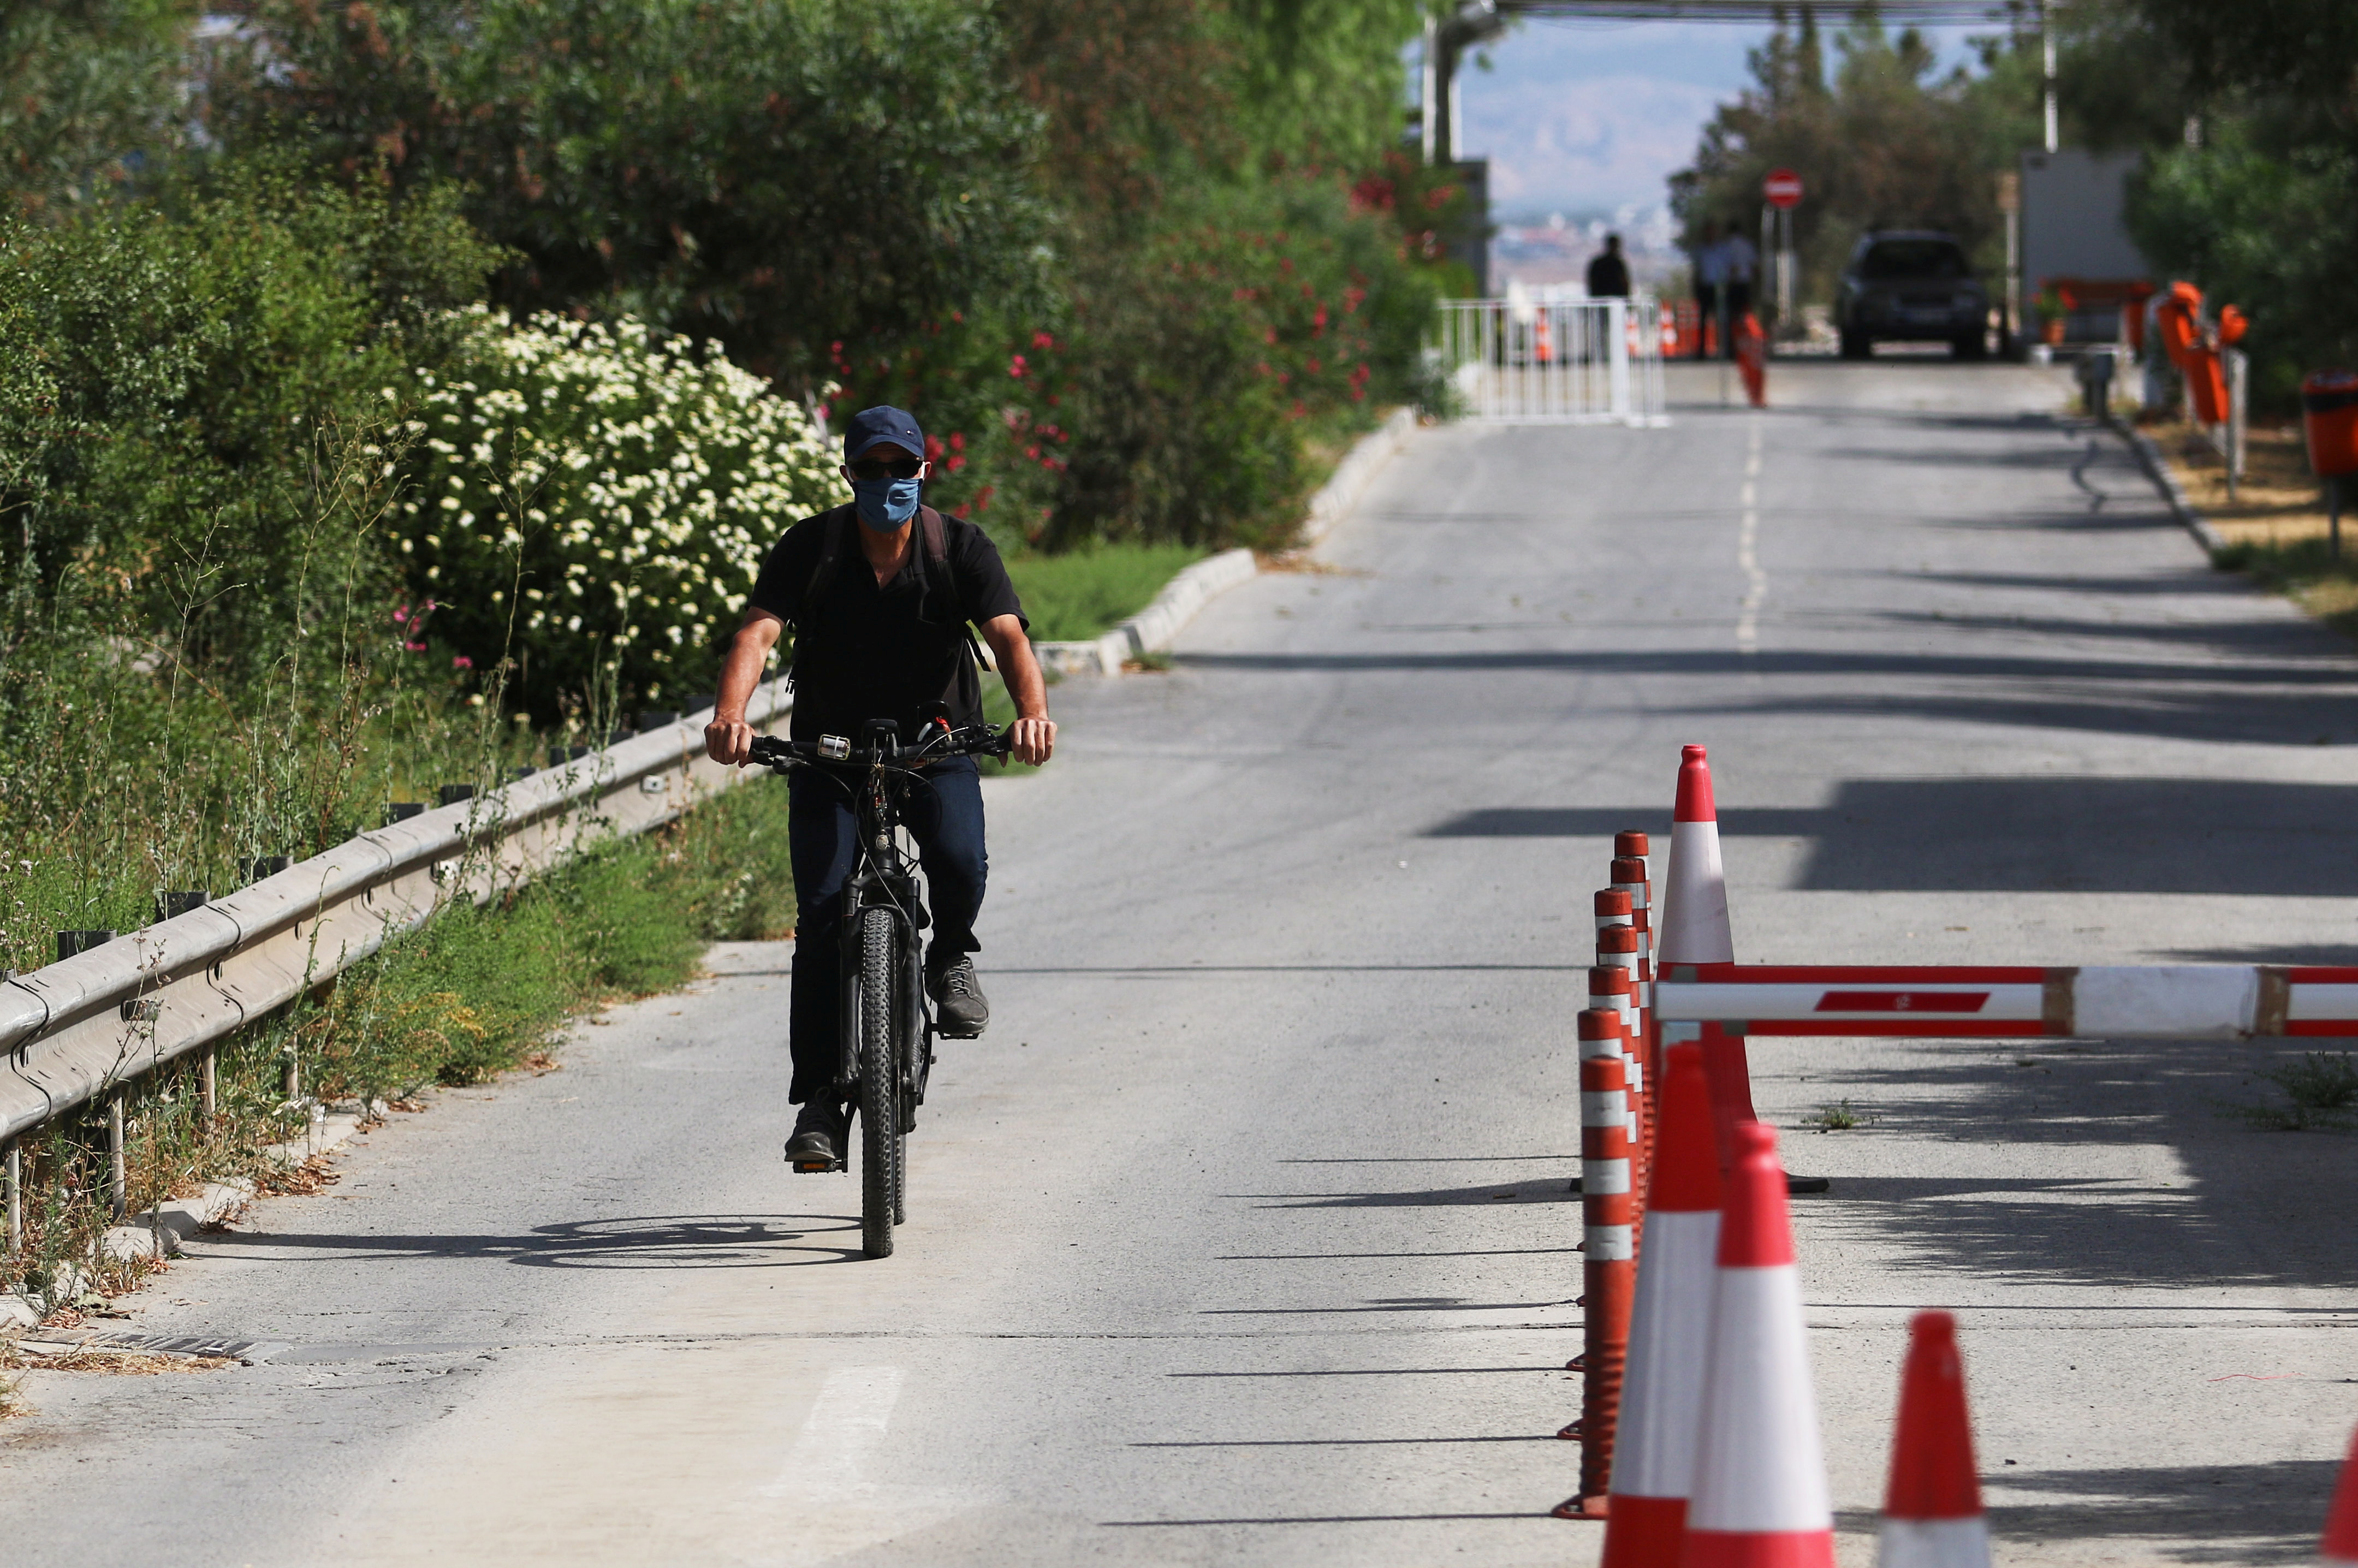 A Turkish Cypriot man wearing a face mask crosses Ayios Dhometios checkpoint on a bicycle, as the spread of the coronavirus disease (COVID-19) continues, in Nicosia, Cyprus June 21, 2020. REUTERS/Yiannis Kourtoglou